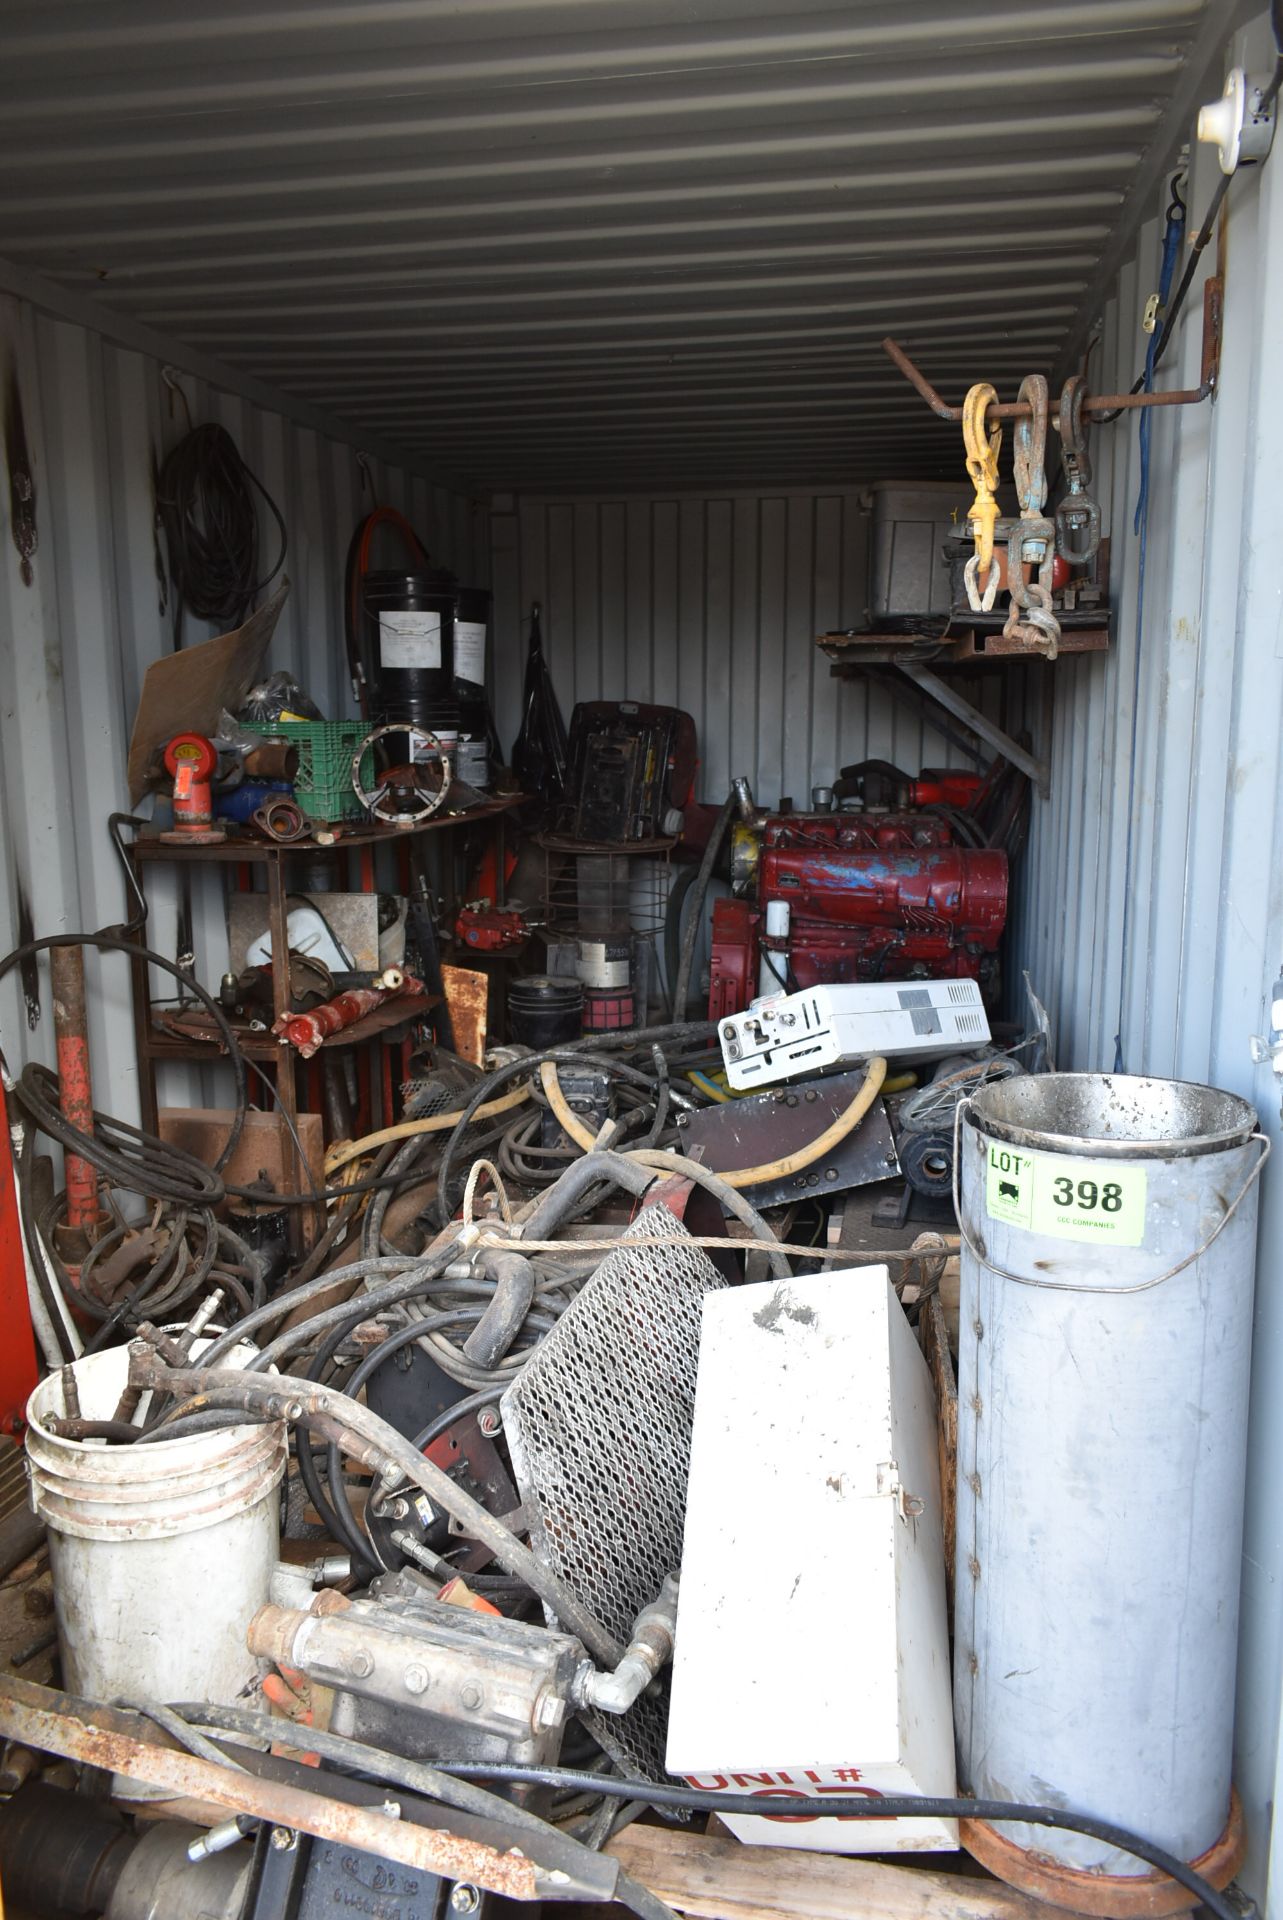 LOT/ CONTENTS OF CONTAINER CONSISTING OF DIESEL ENGINES, HYDRAULIC PARTS, HOSE & COMPONENTS